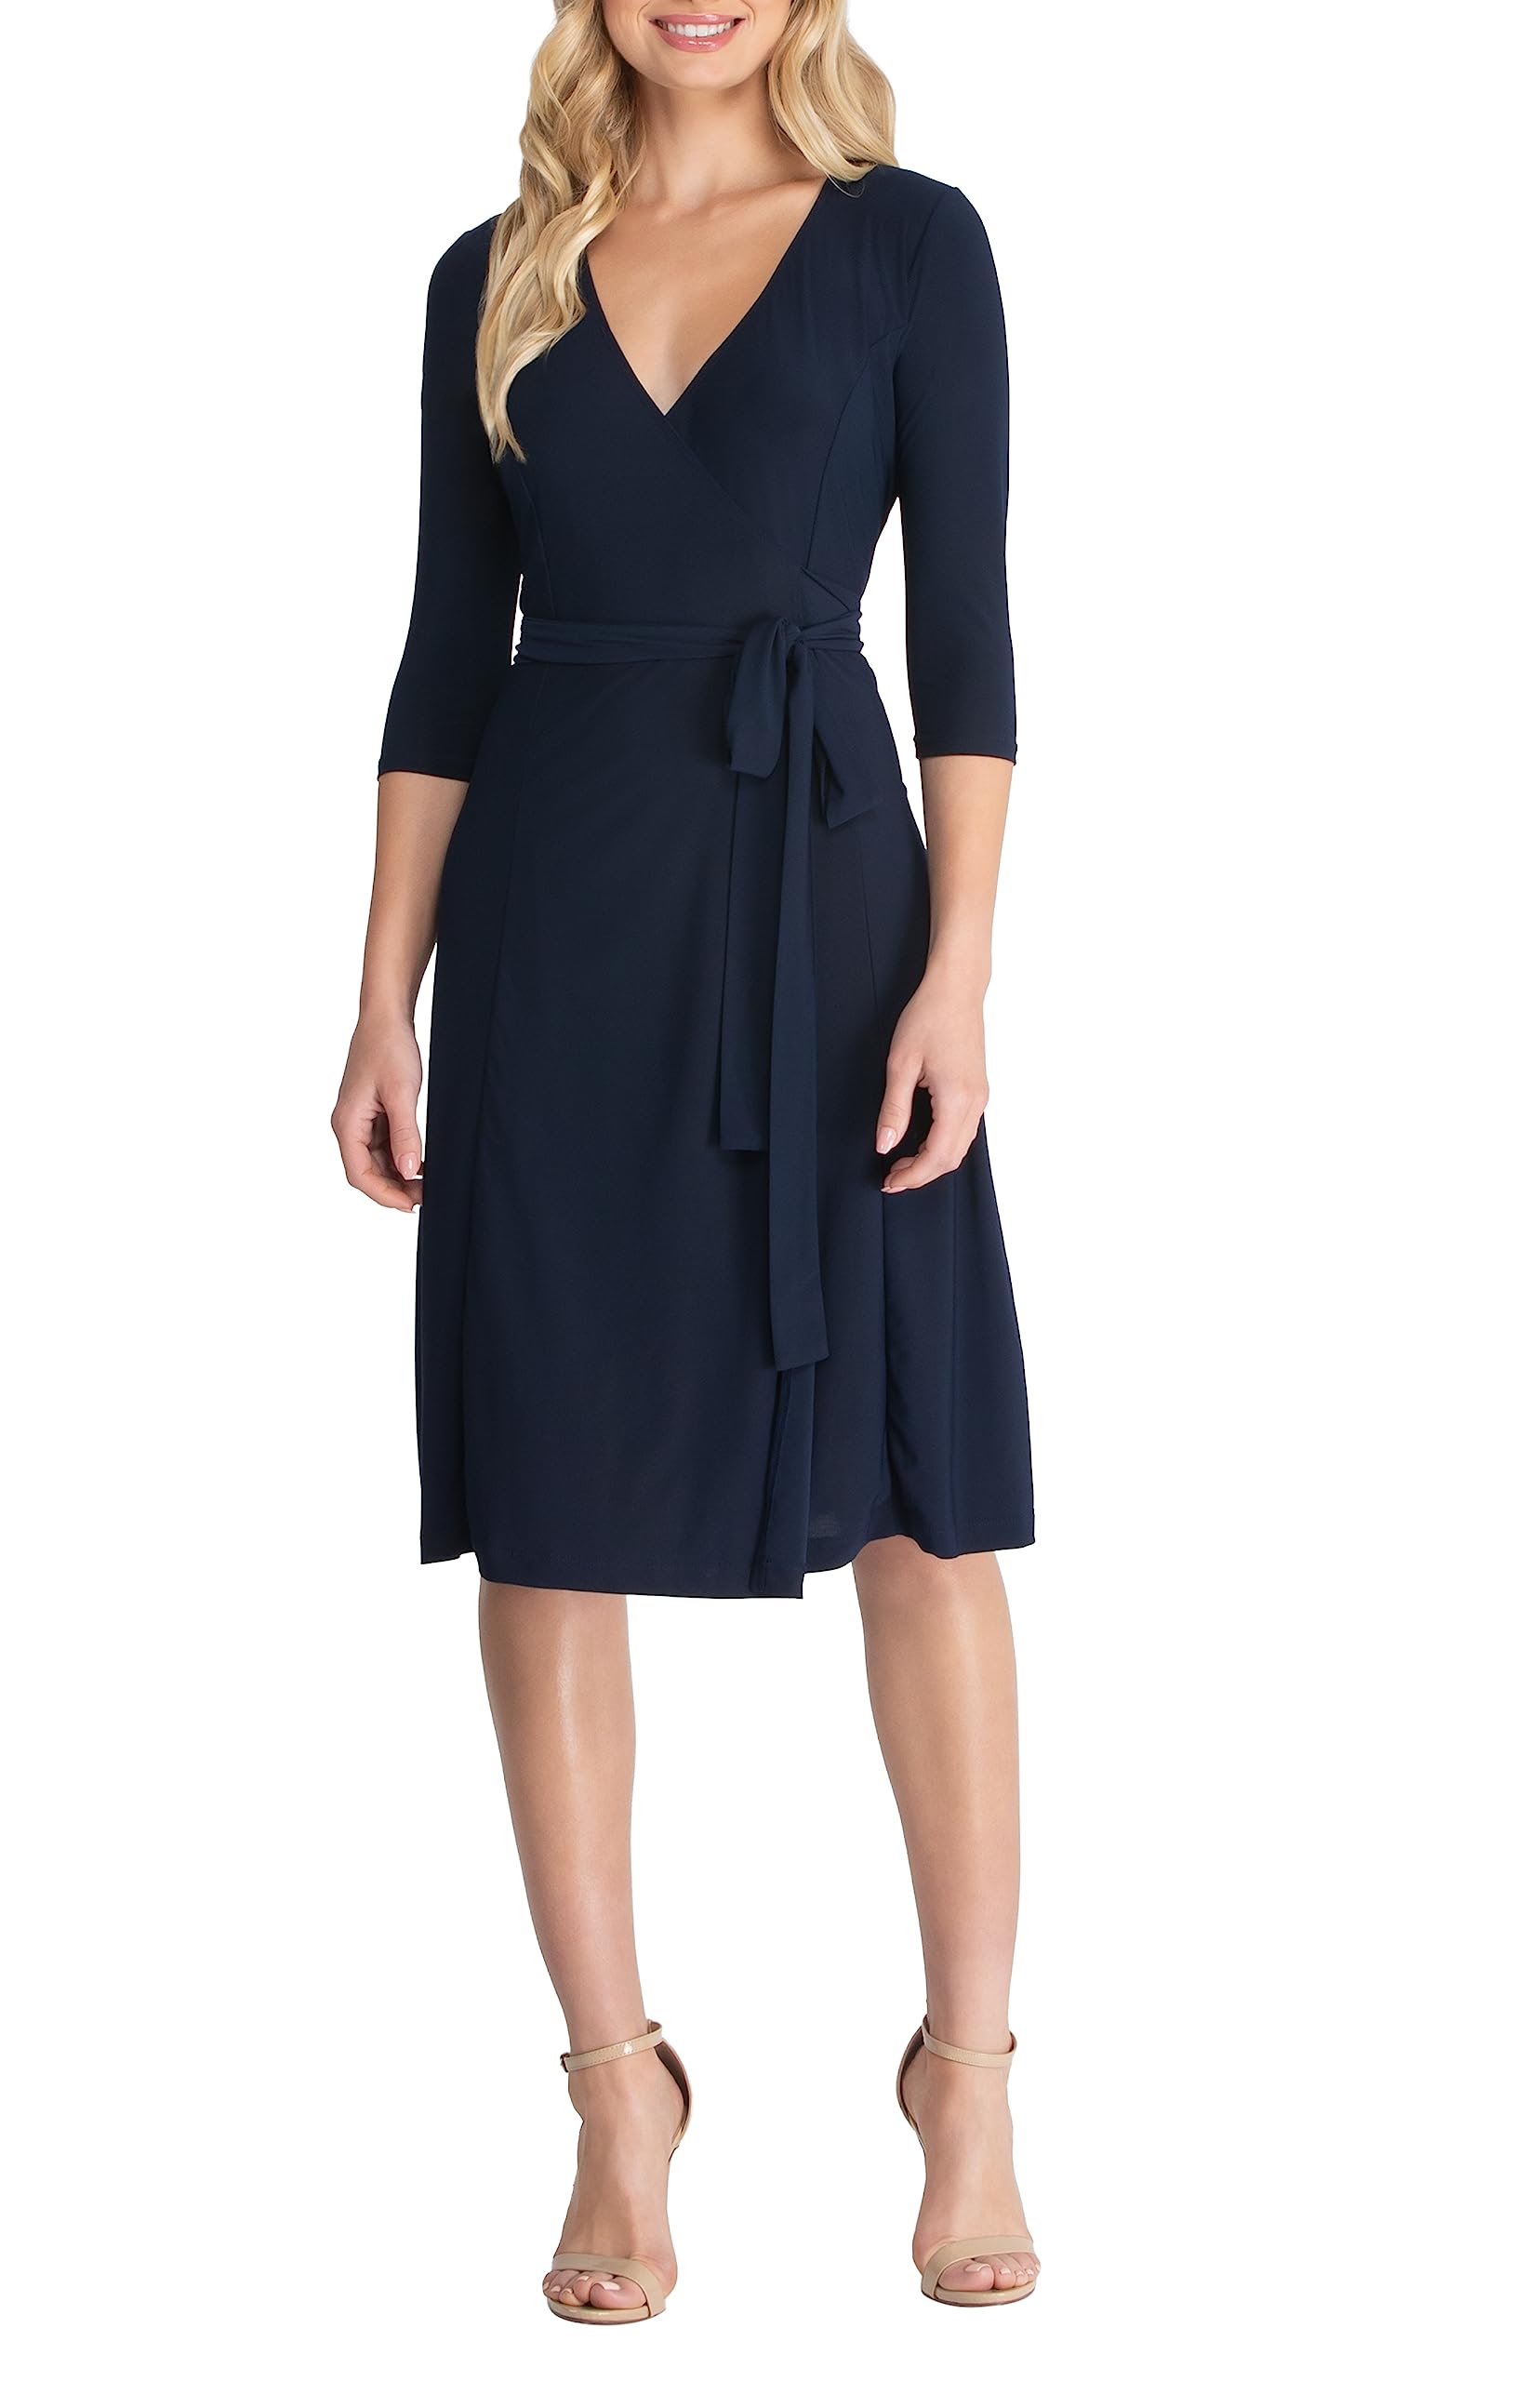 Kiyonna Plus Size Essential Midi Wrap Dress with Sleeves | Cocktail, Party, Wedding Guest or Work